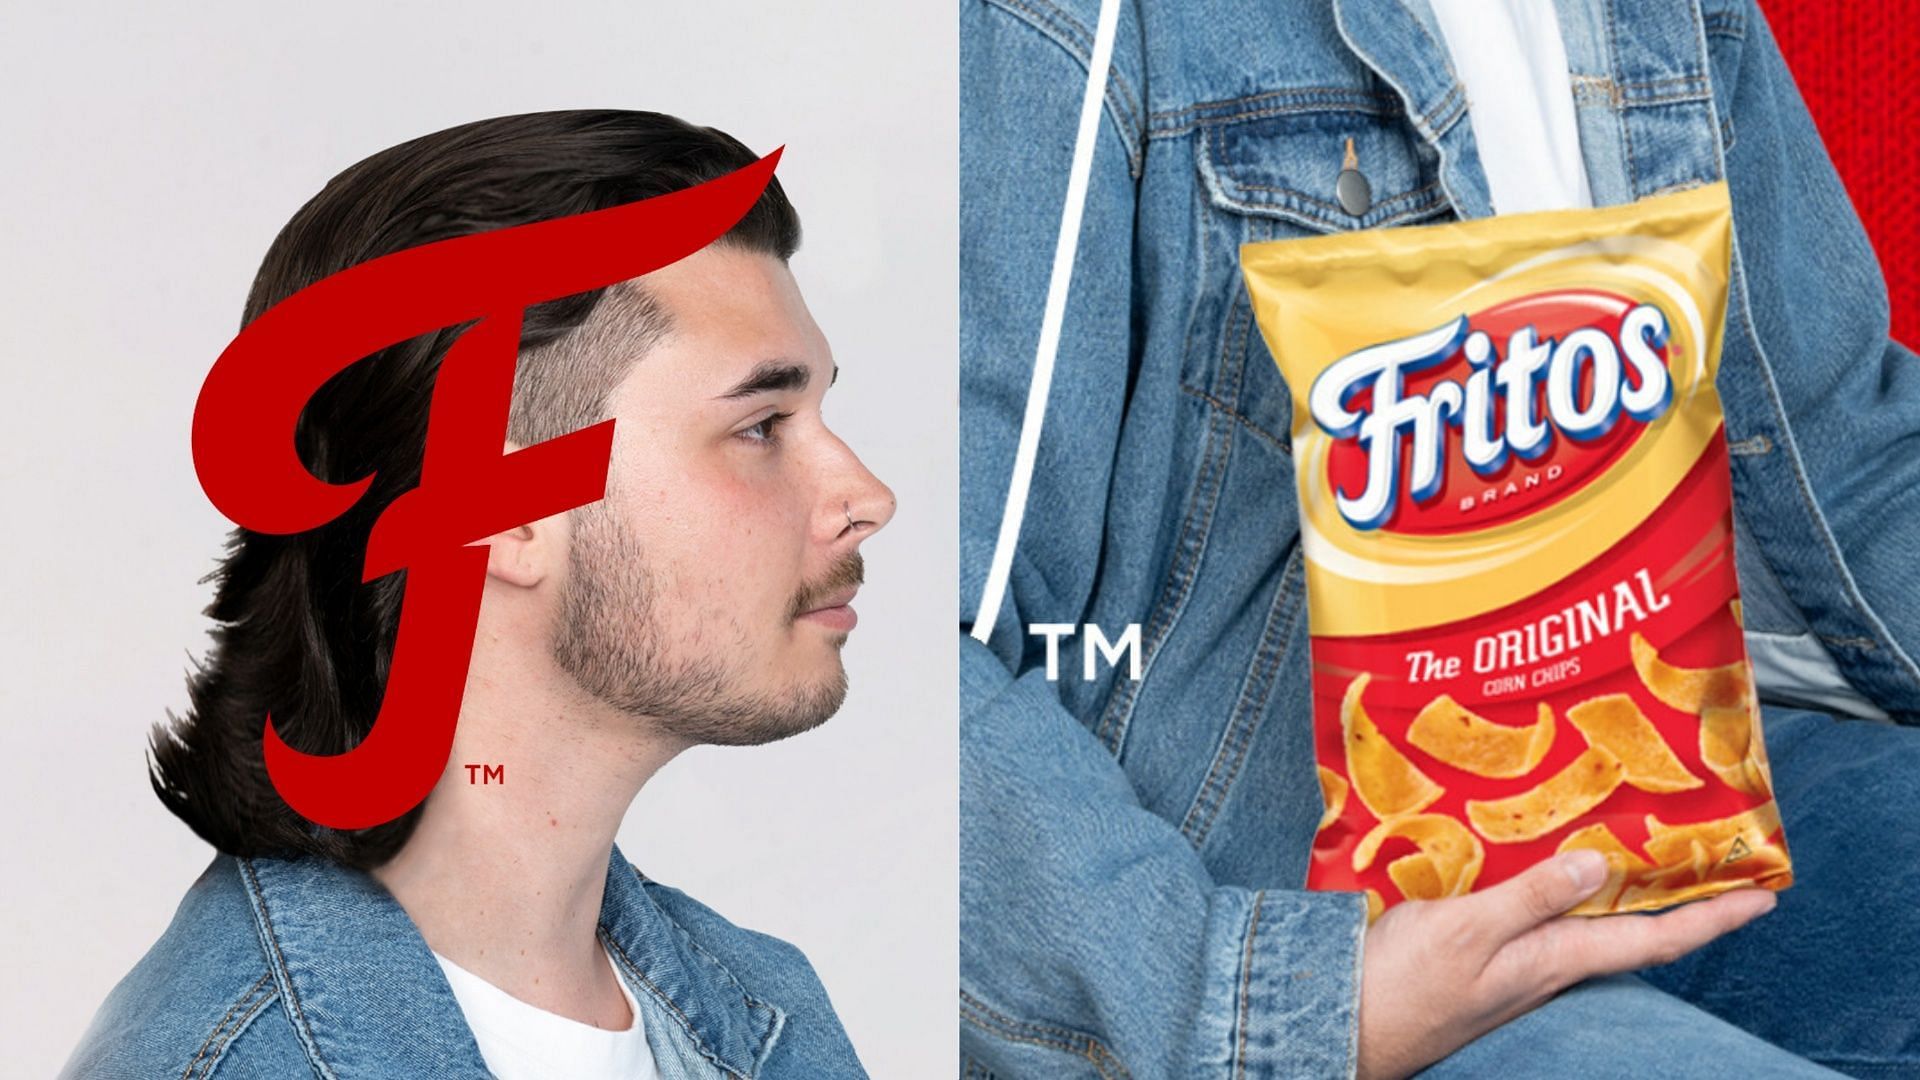 Frito-Lay is offering free mullet haircuts with a limited-time partnership with Floyd